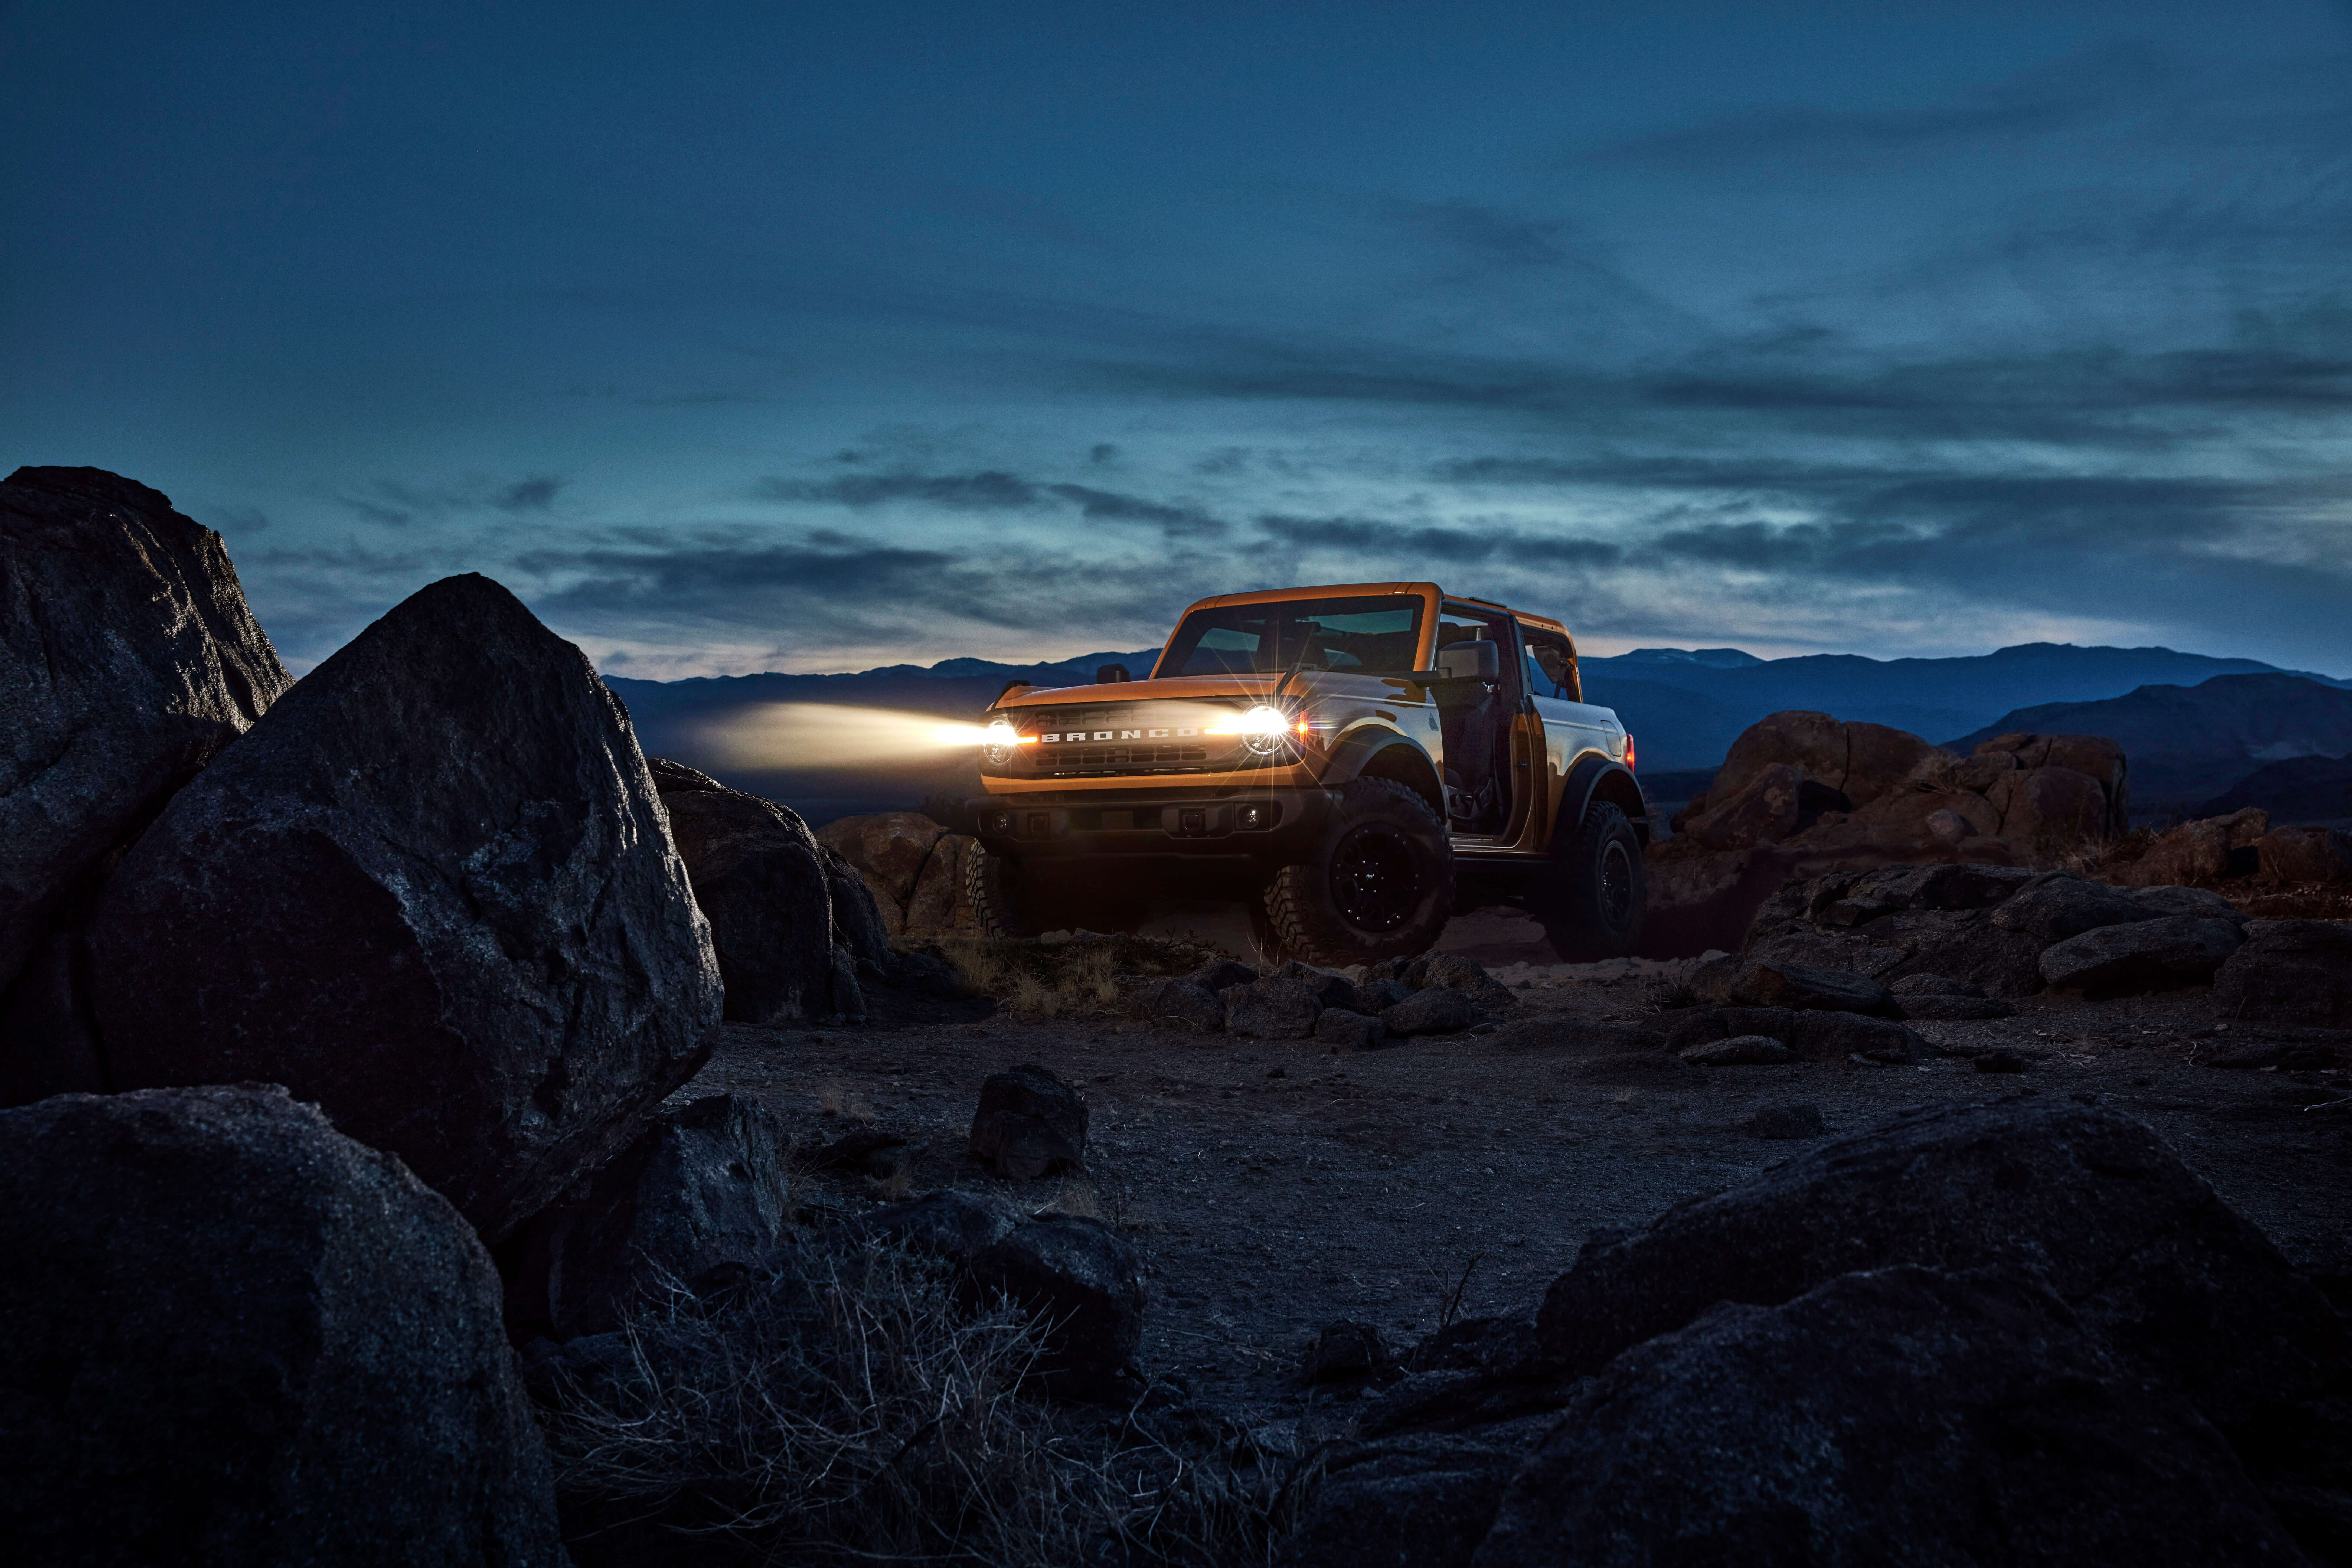 Top 5 LED Light Bars: Review and Buyer’s Guide